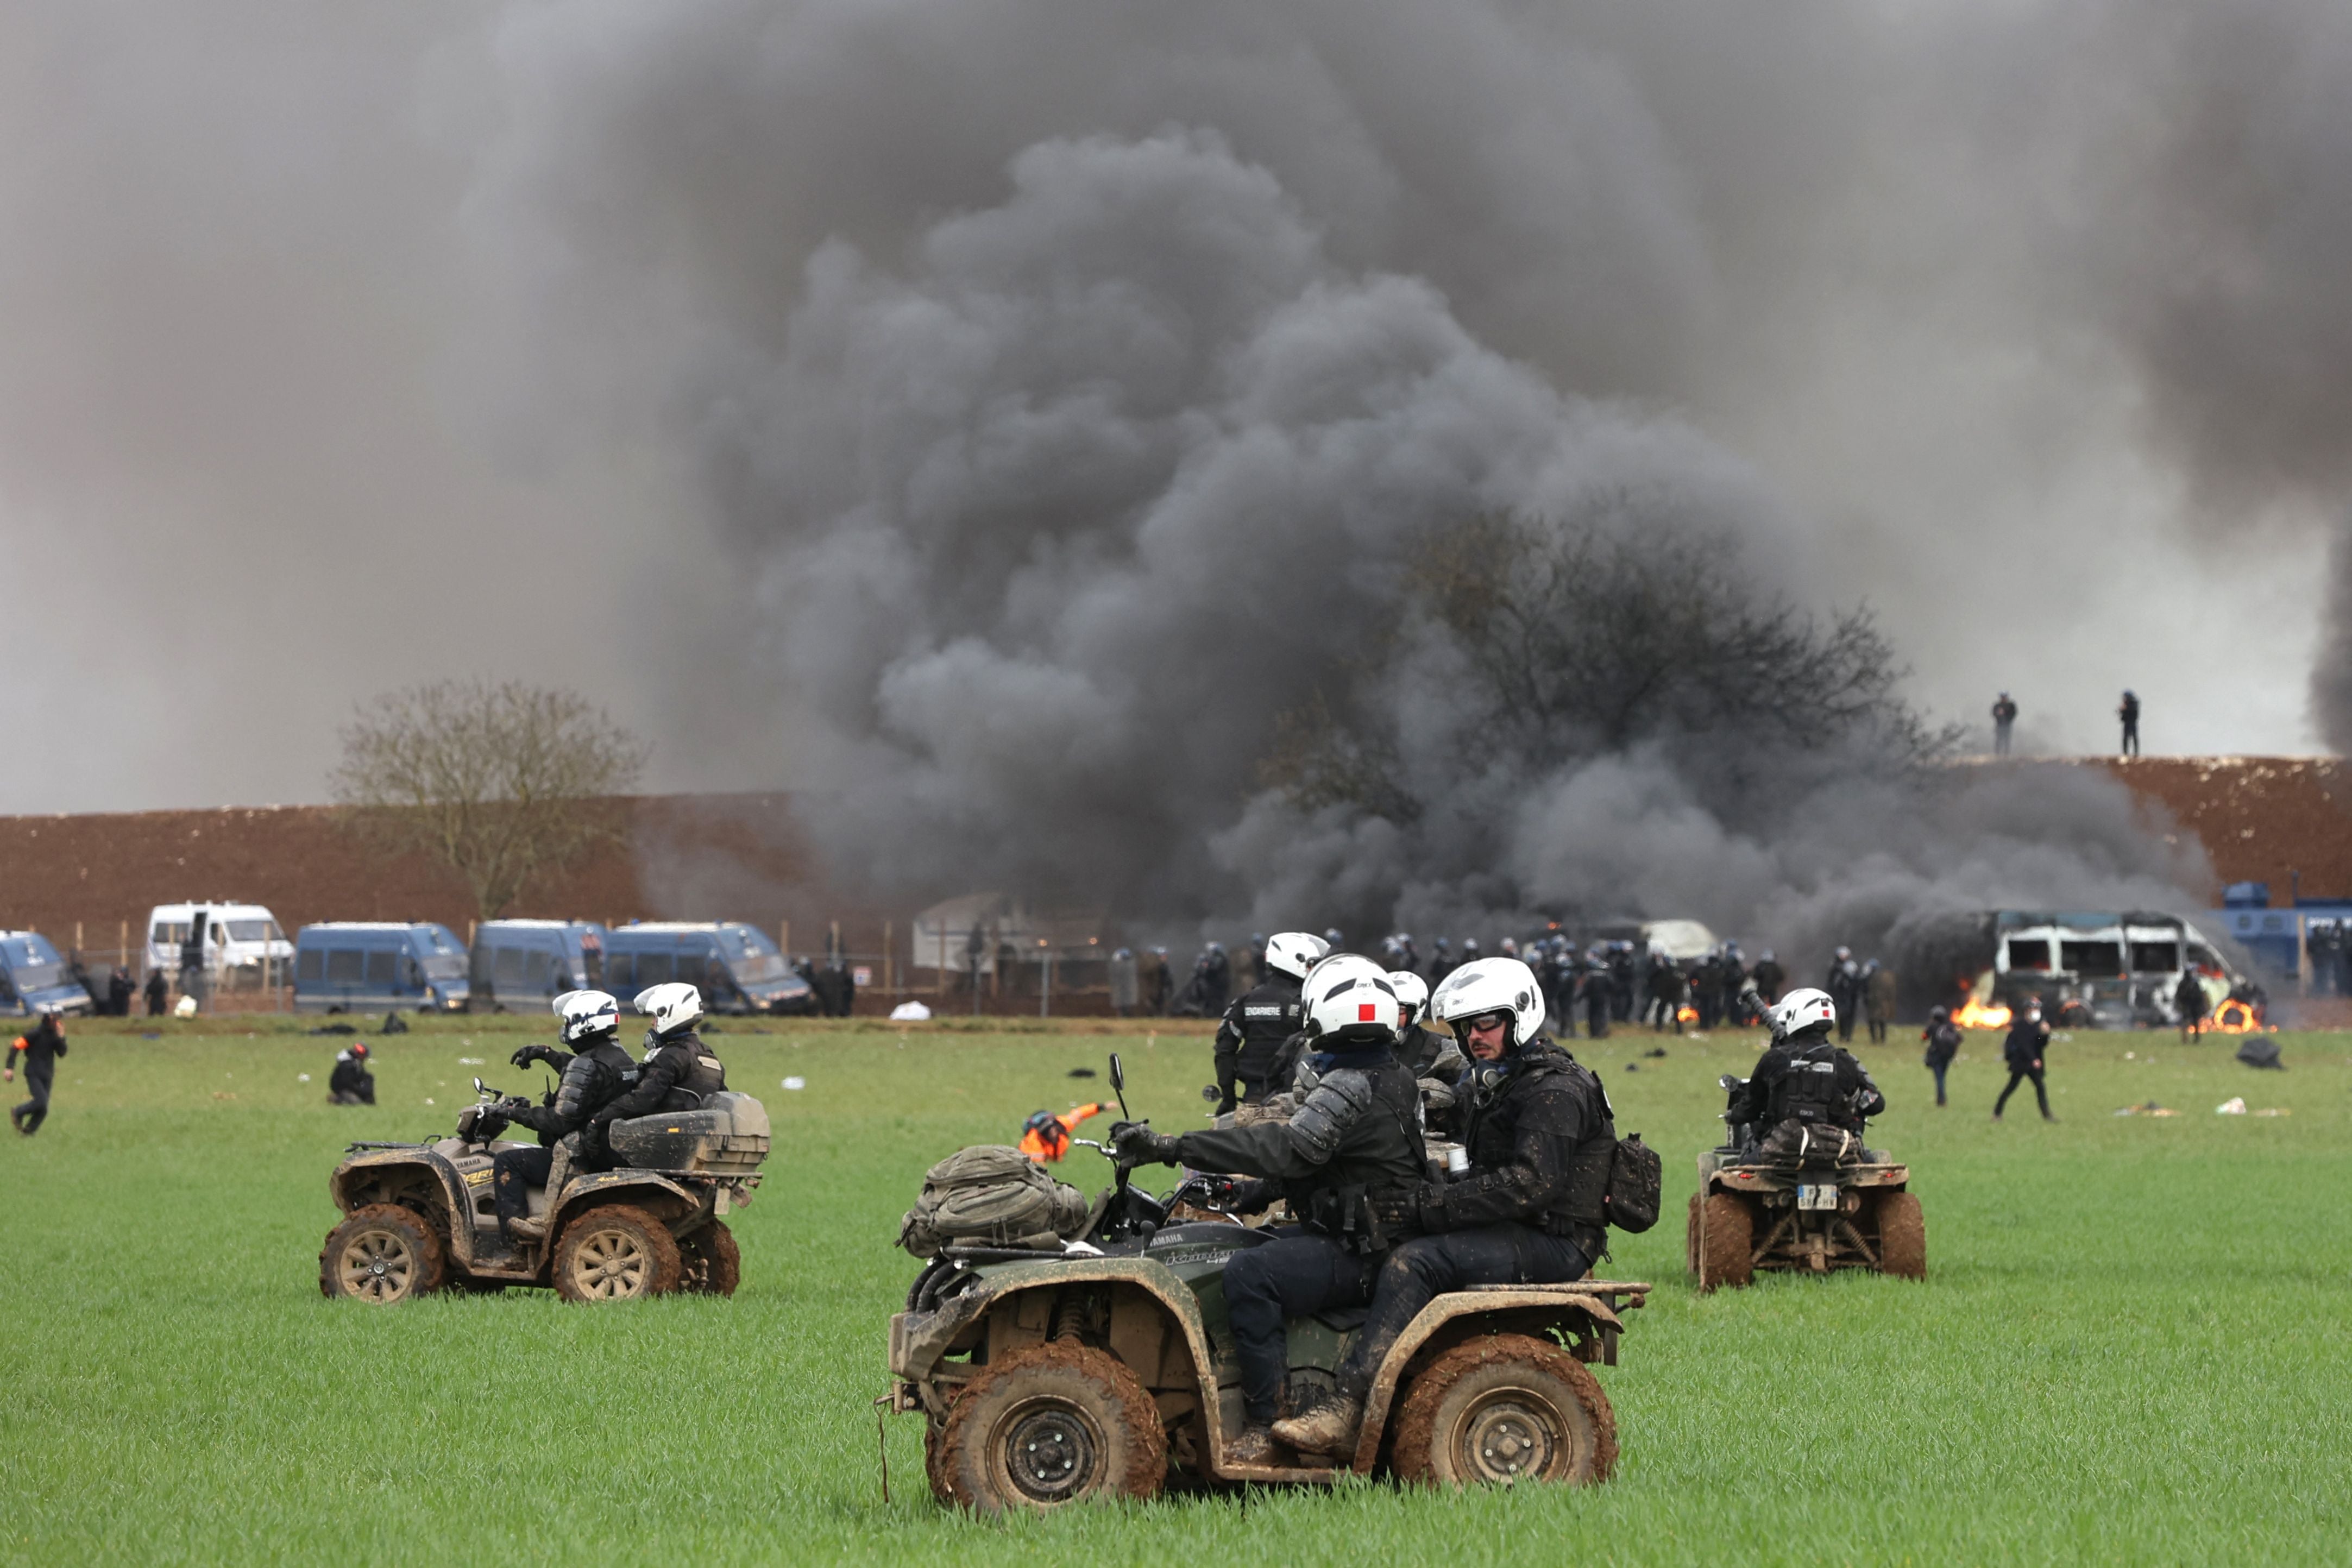 Riot mobile gendarmes, riding quad bikes, fire teargas shells towards protesters during the demonstration